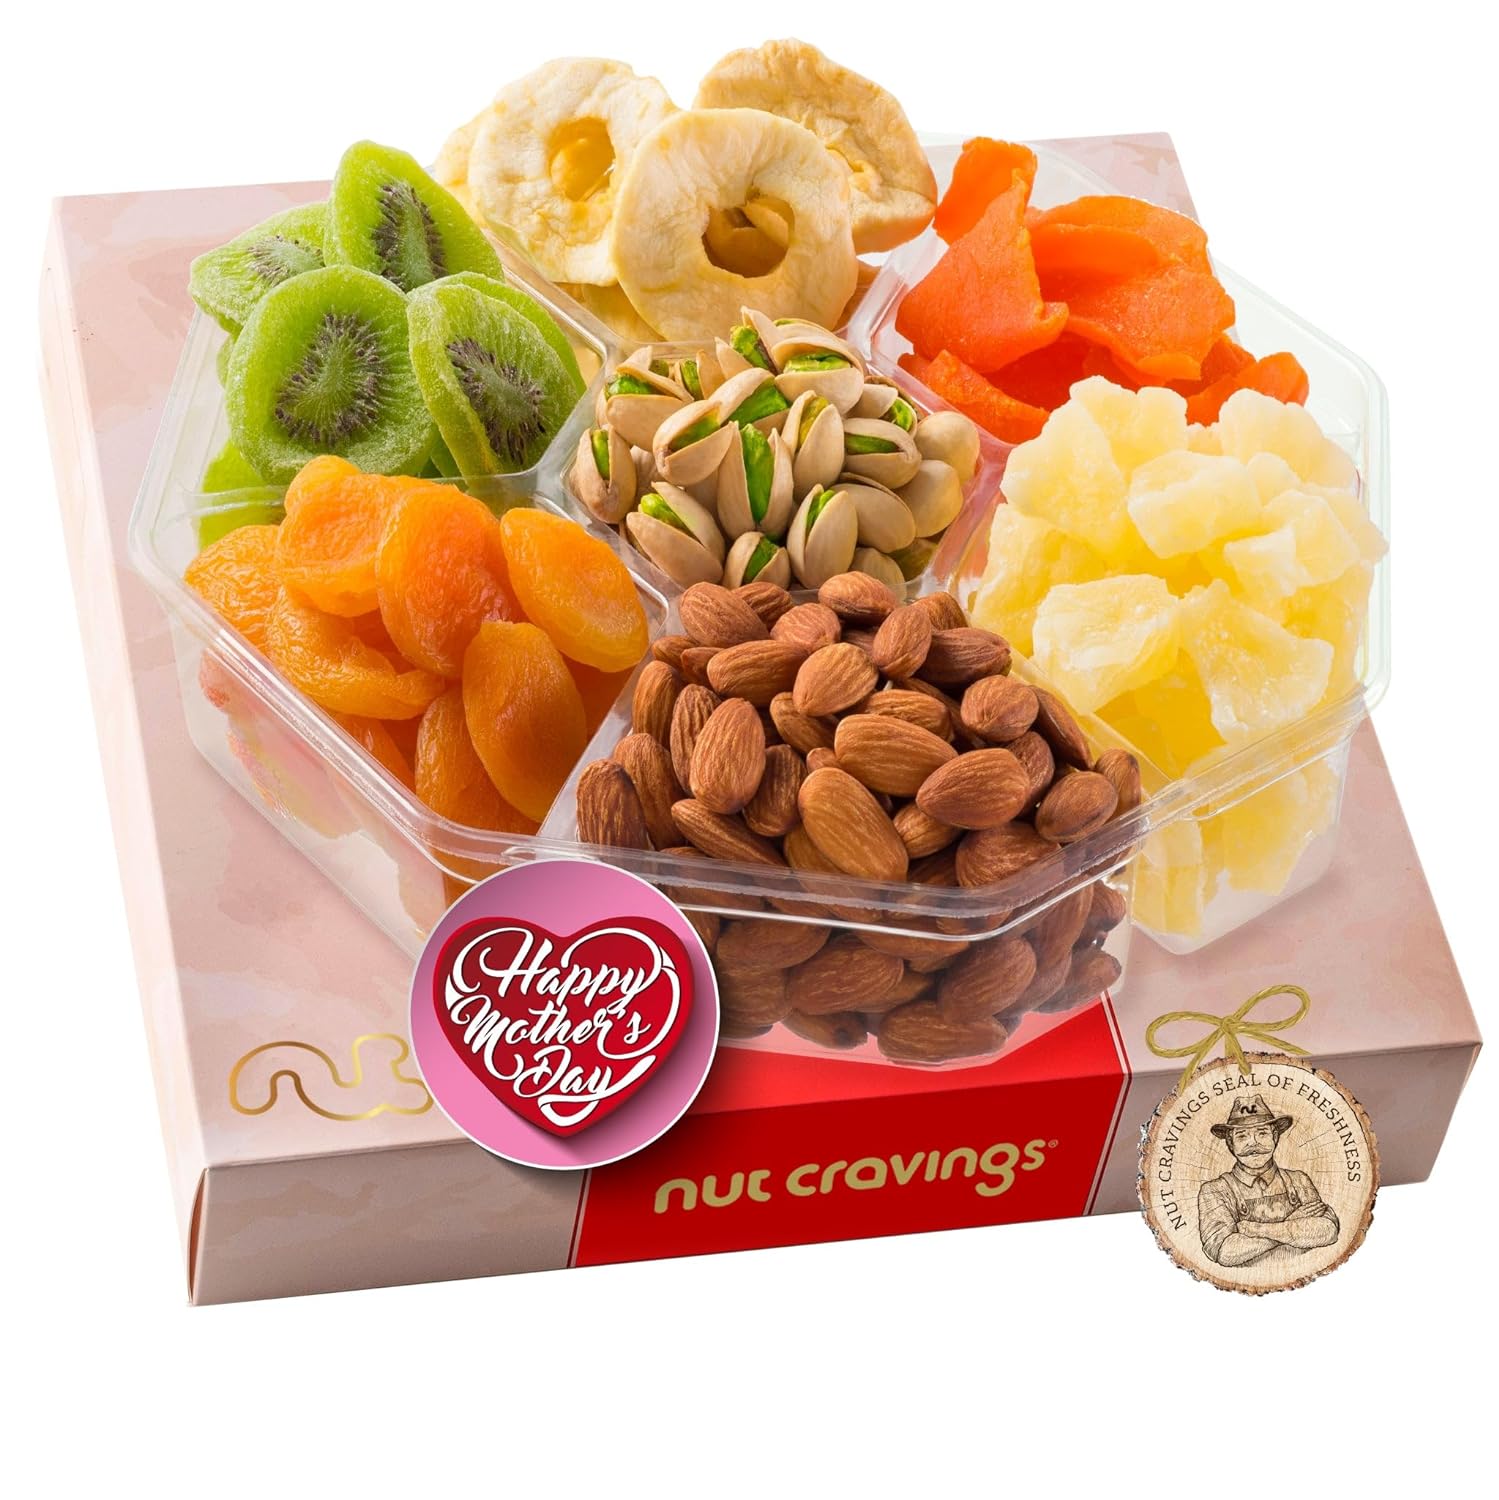 Nut Cravings Gourmet Collection - Mothers Day Dried Fruit & Mixed Nuts Gift Basket in Red Box (7 Assortments, 2 LB) Arrangement Platter, Birthday Care Package - Healthy Kosher